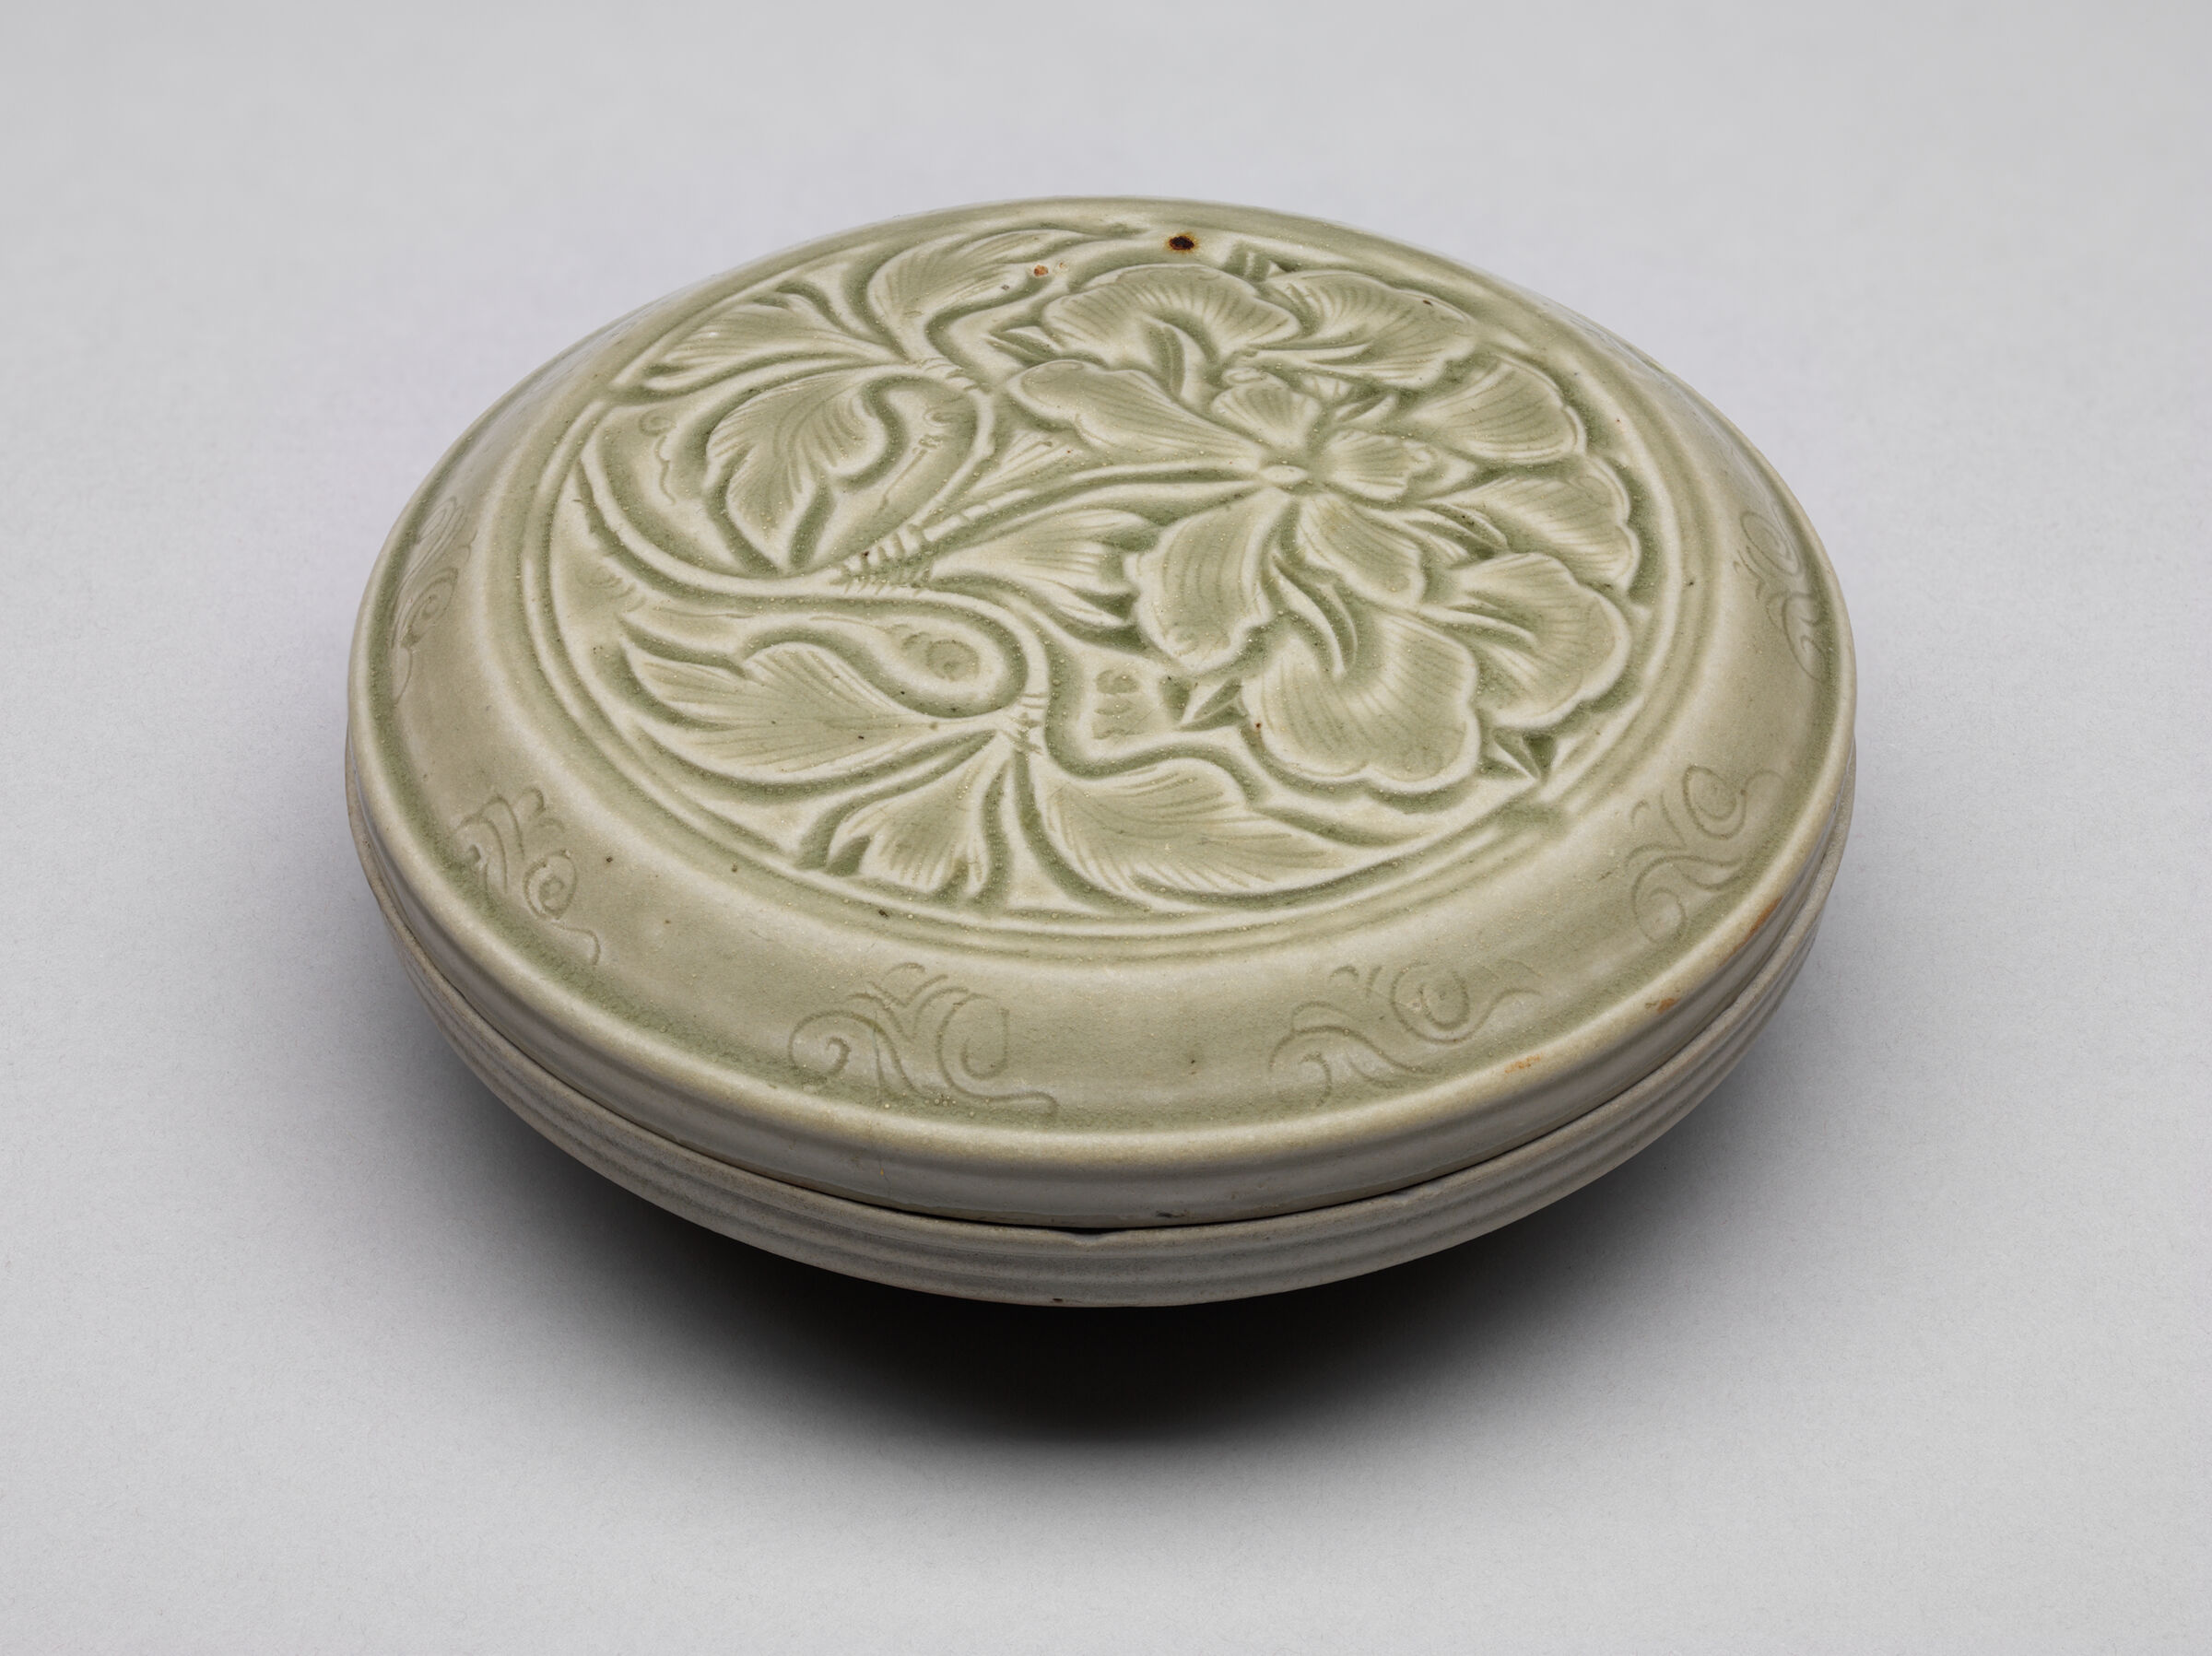 Circular Covered Box With Peony Décor